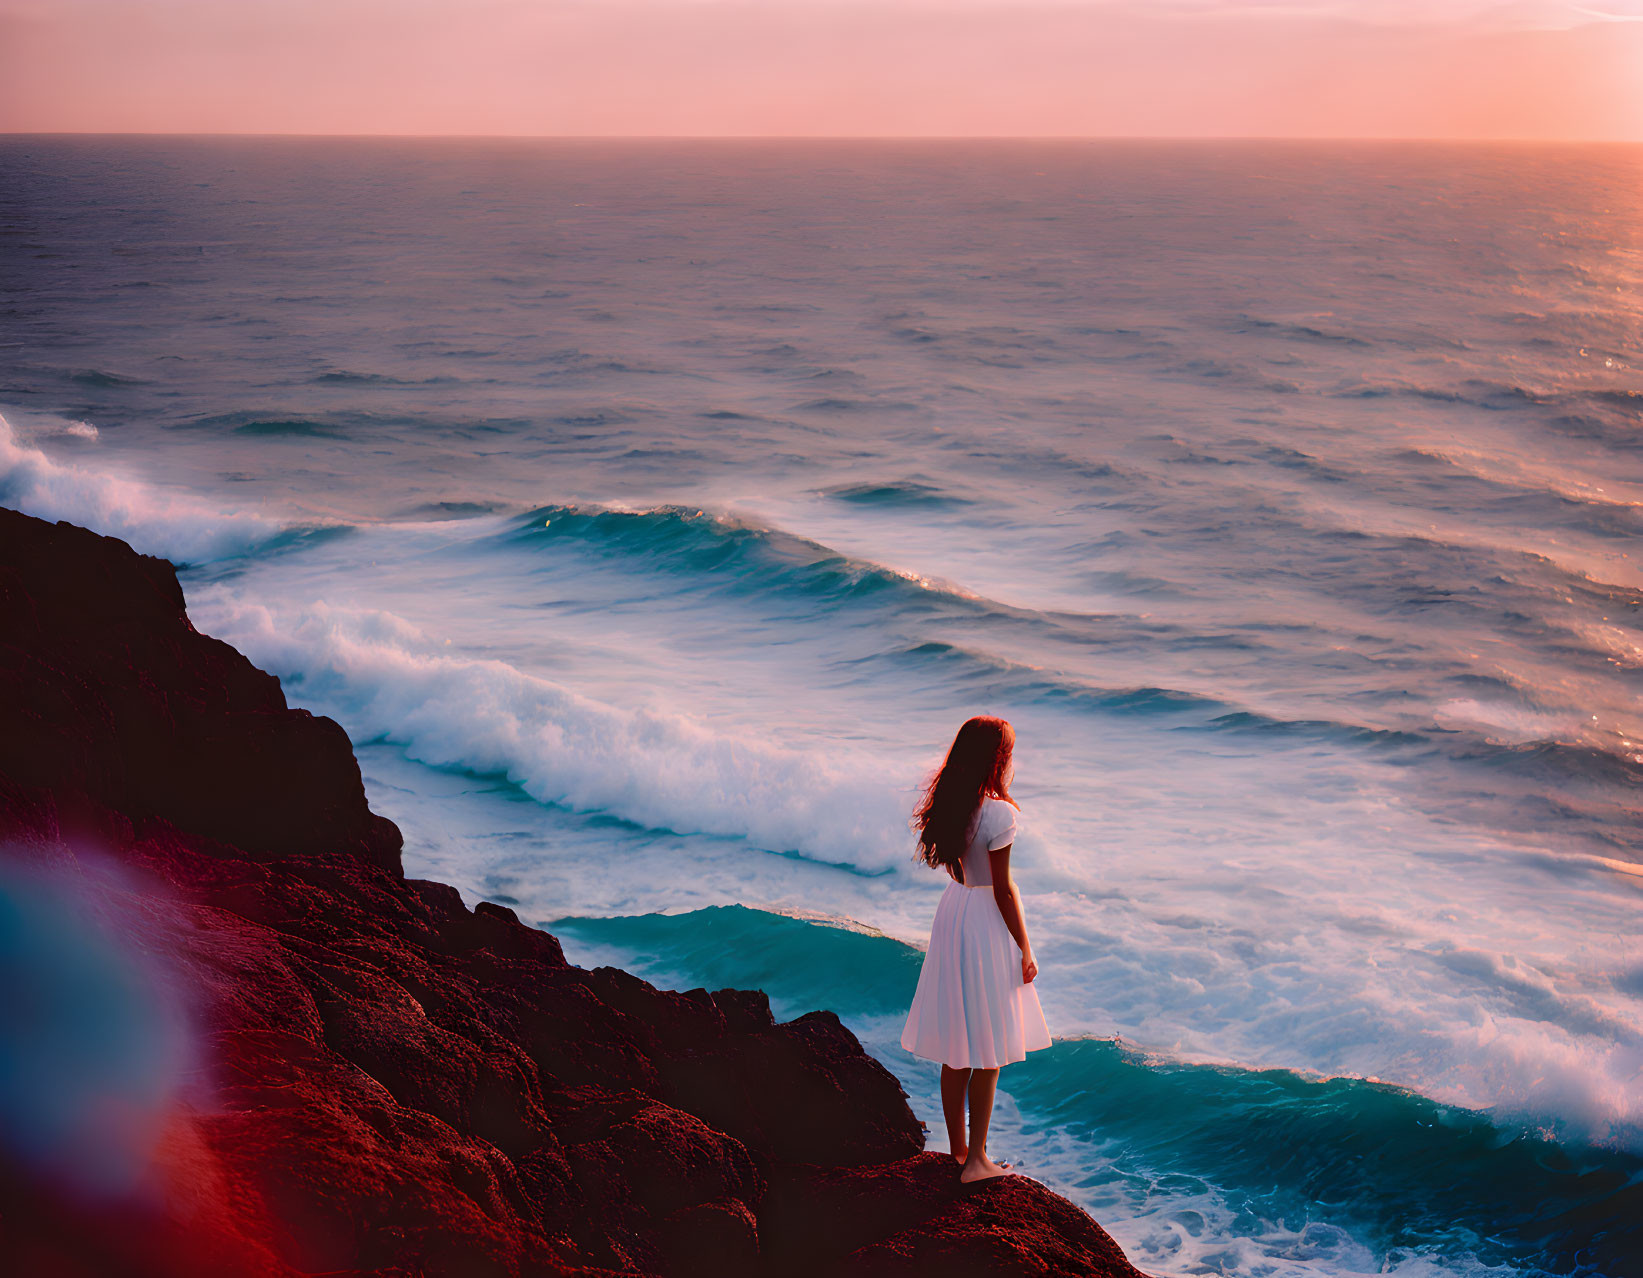 Woman in White Dress on Rocky Cliff Overlooking Ocean at Sunset